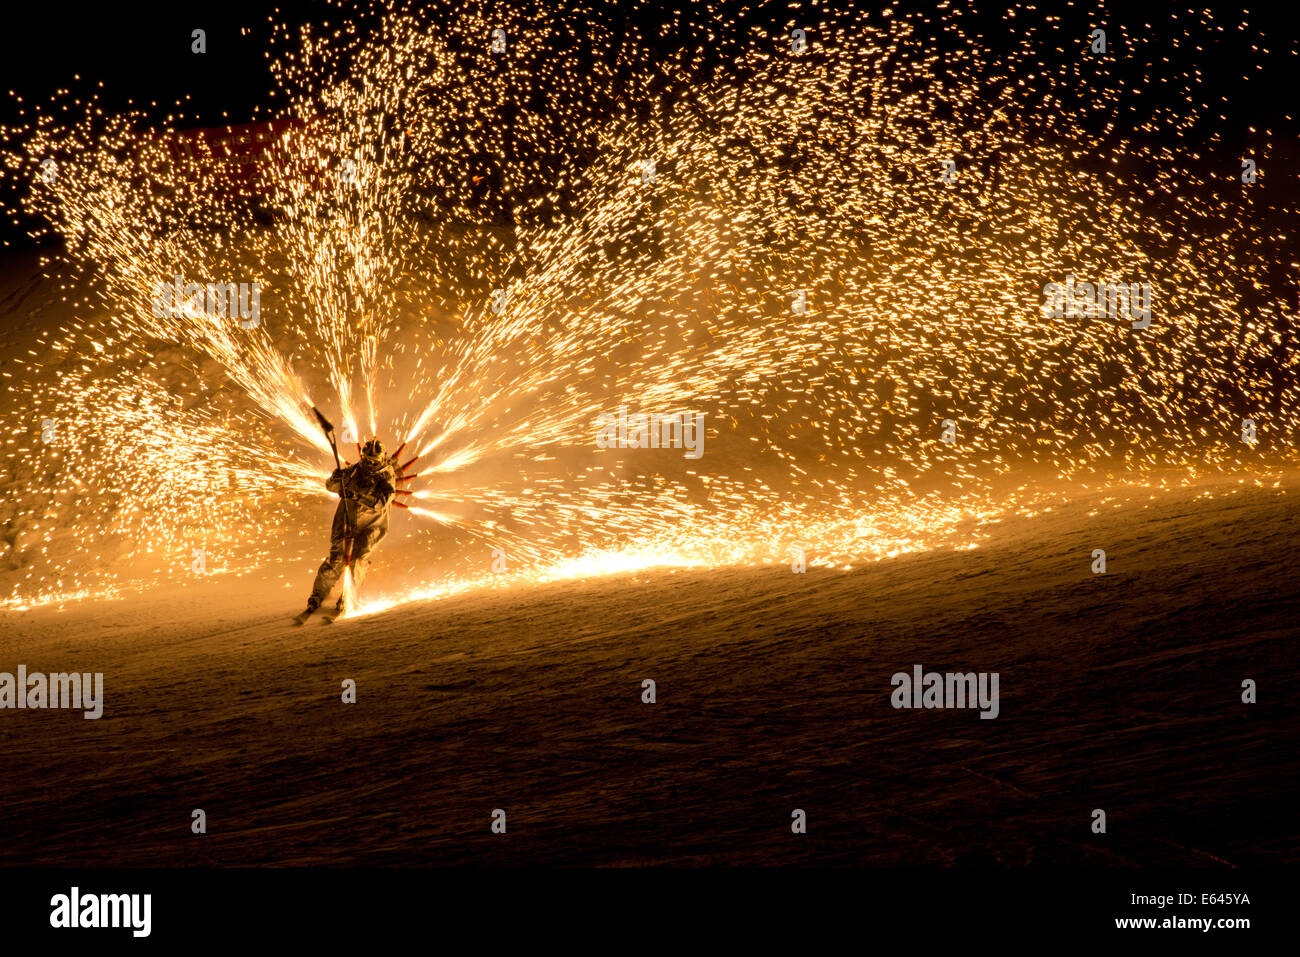 Skier coming down a ski slope with fireworks attached to his back in a performance to celebrate the New Year Stock Photo